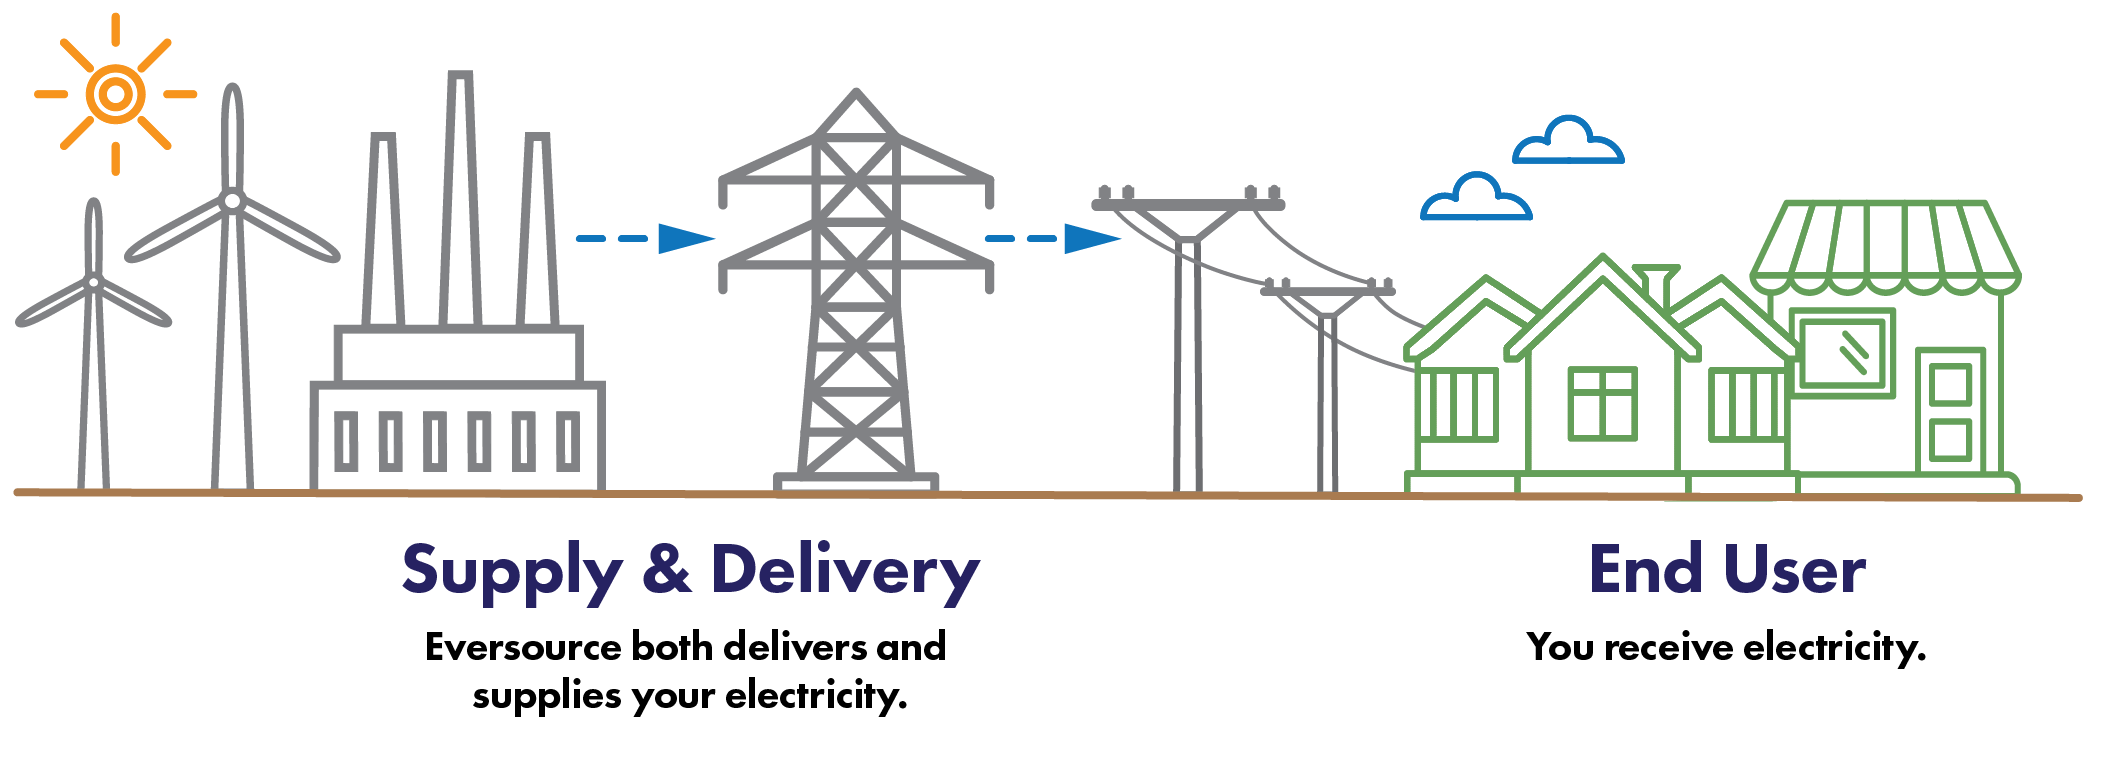 Diagram describing how delivery and supply works without Chelsea Electricity Choice. Detailed description above after the header Without Chelsea Electricity Choice.